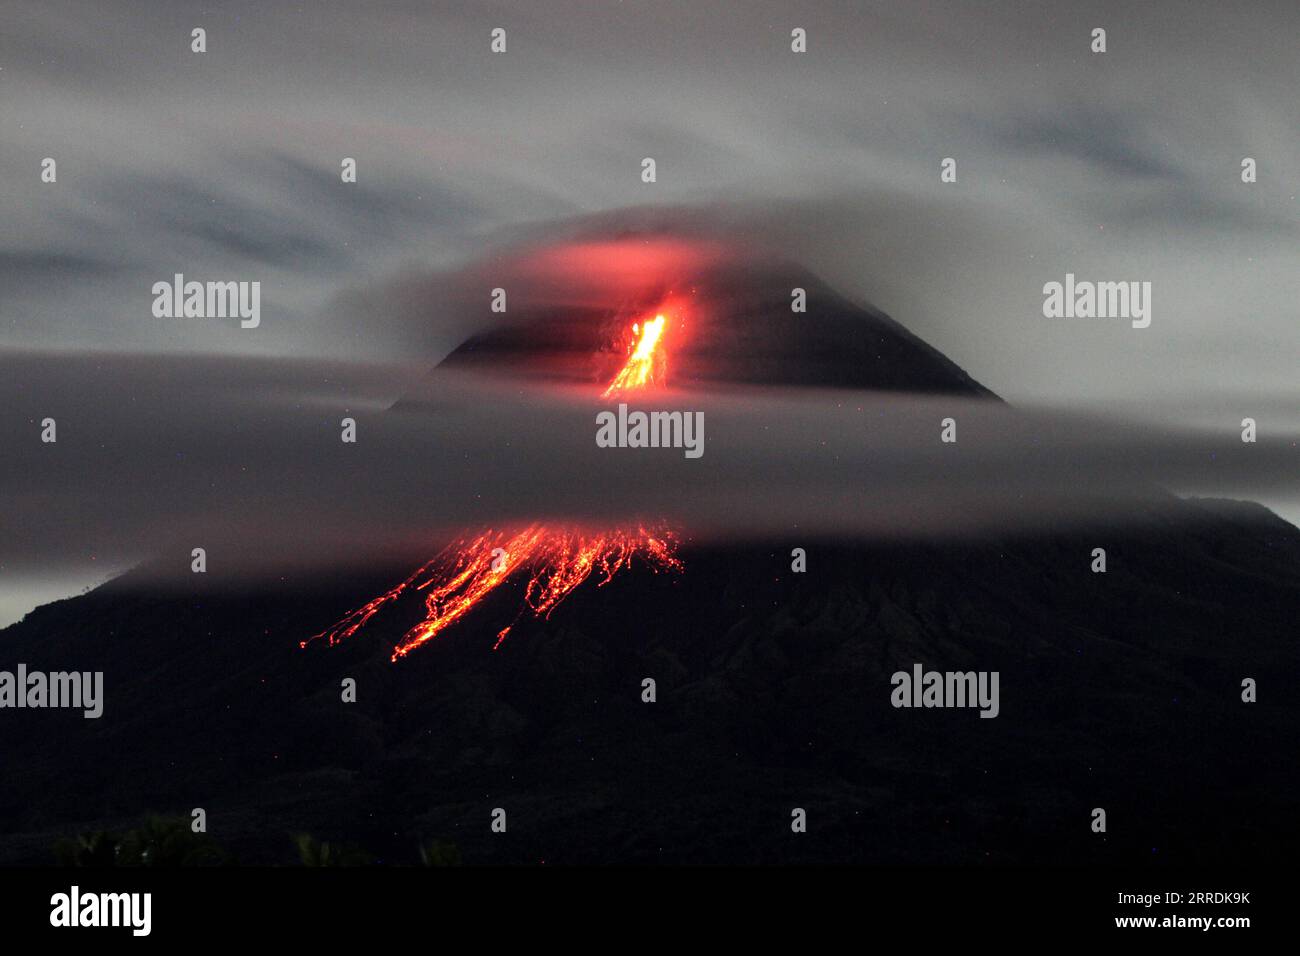 211231 -- MAGELANG, Dec. 31, 2021 -- Photo taken on Dec. 31, 2021 shows Mount Merapi spewing smoke and volcanic materials, as seen from Srumbung Village in Magelang, Central Java, Indonesia. Photo by /Xinhua INDONESIA-MAGELANG-MOUNT MERAPI-ERUPTION PriyoxUtomo PUBLICATIONxNOTxINxCHN Stock Photo